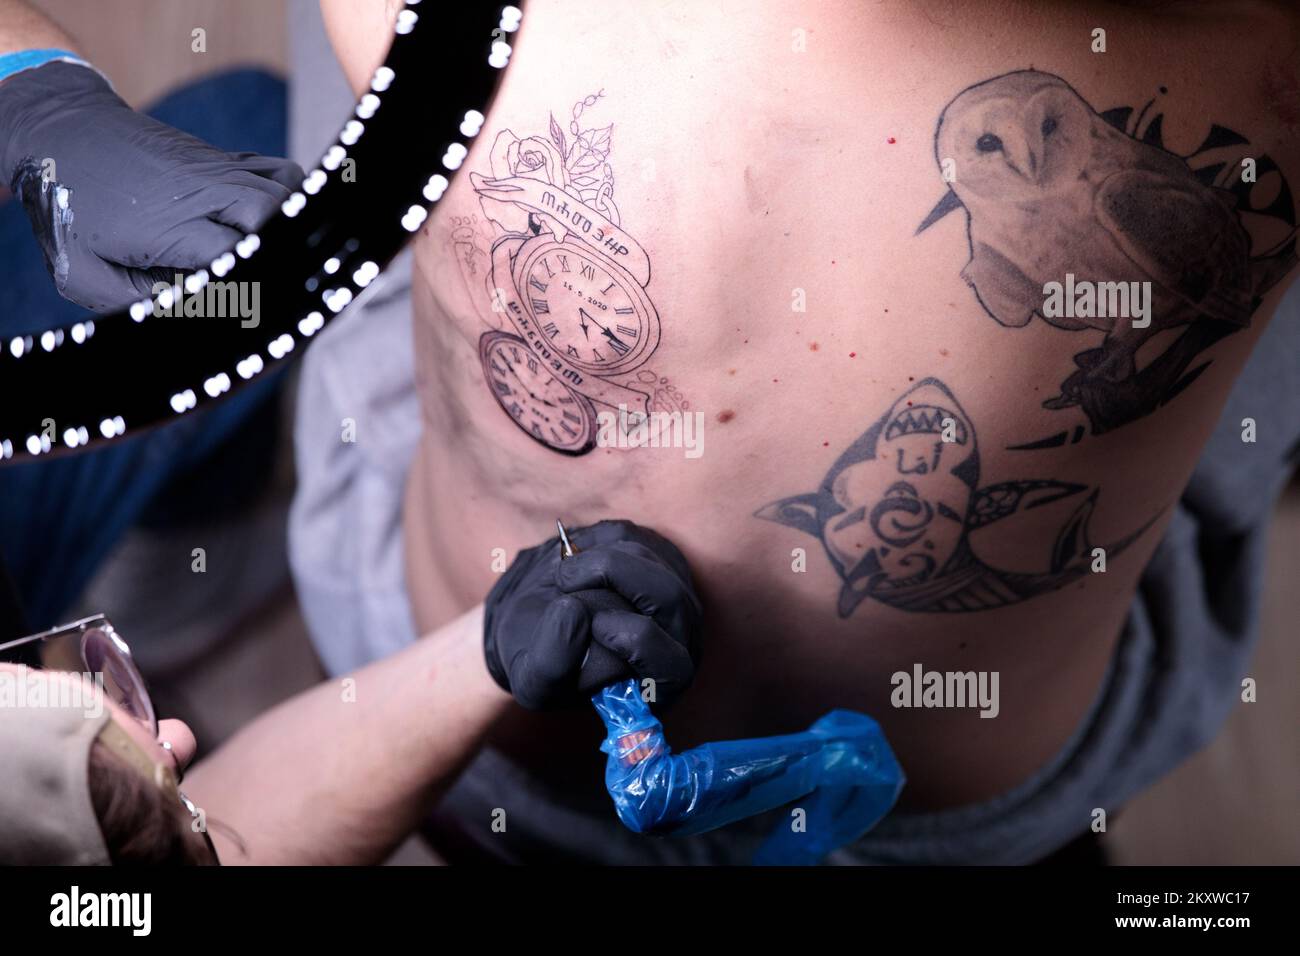 A tattoo artist works on a design during the 2021 International Tattoo Expo Convention in Rijeka, Croatia on November 27, 2021. Photo: Nel Pavletic/PIXSELL Stock Photo